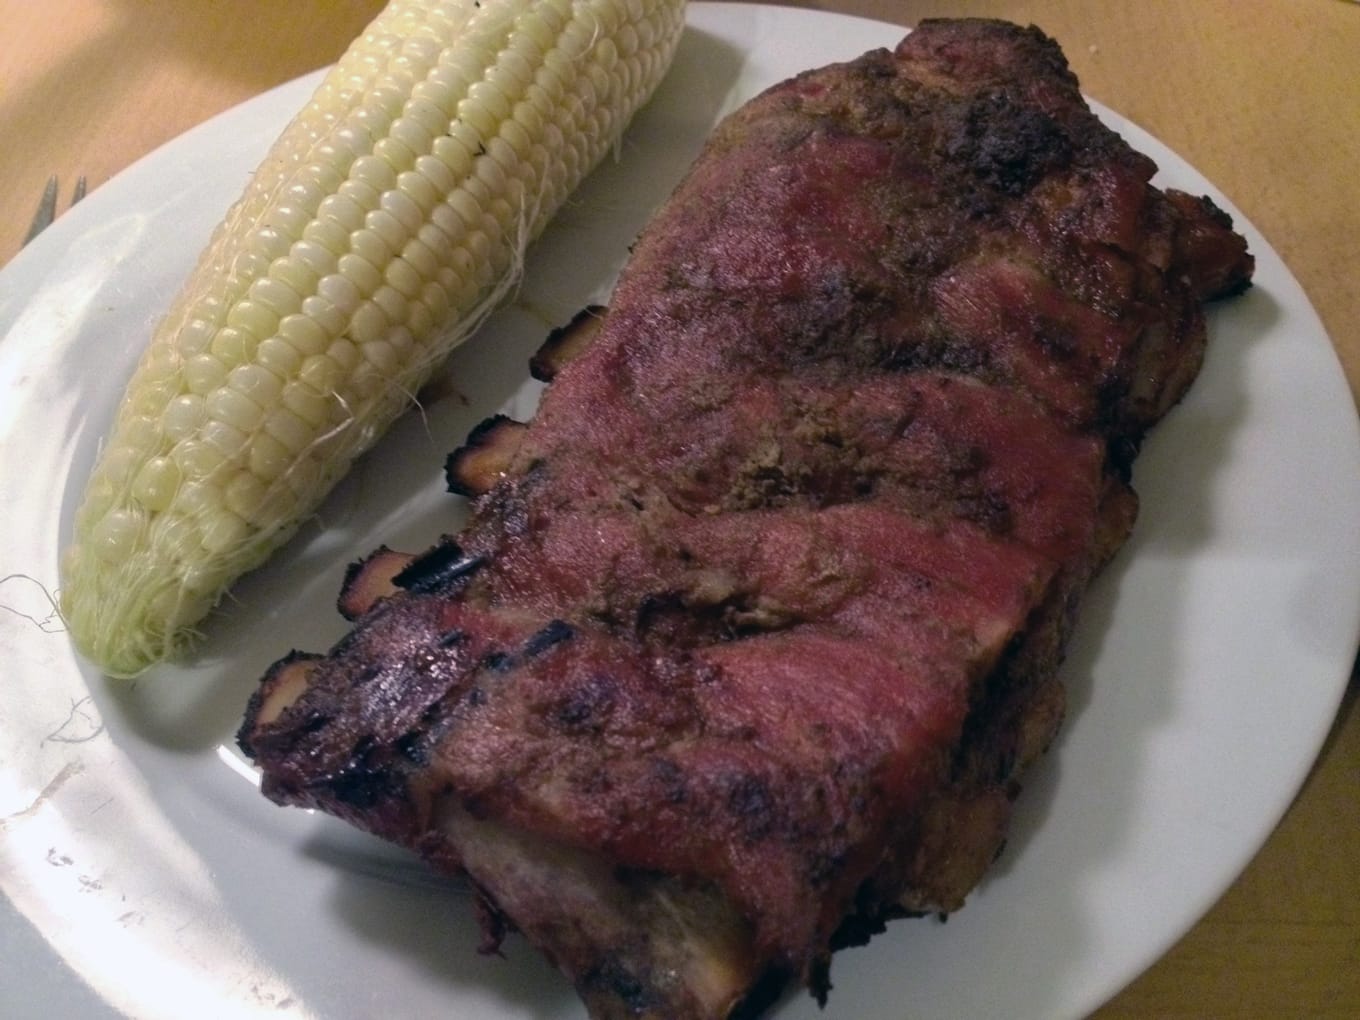 Spare ribs with a side of corn on the plate.